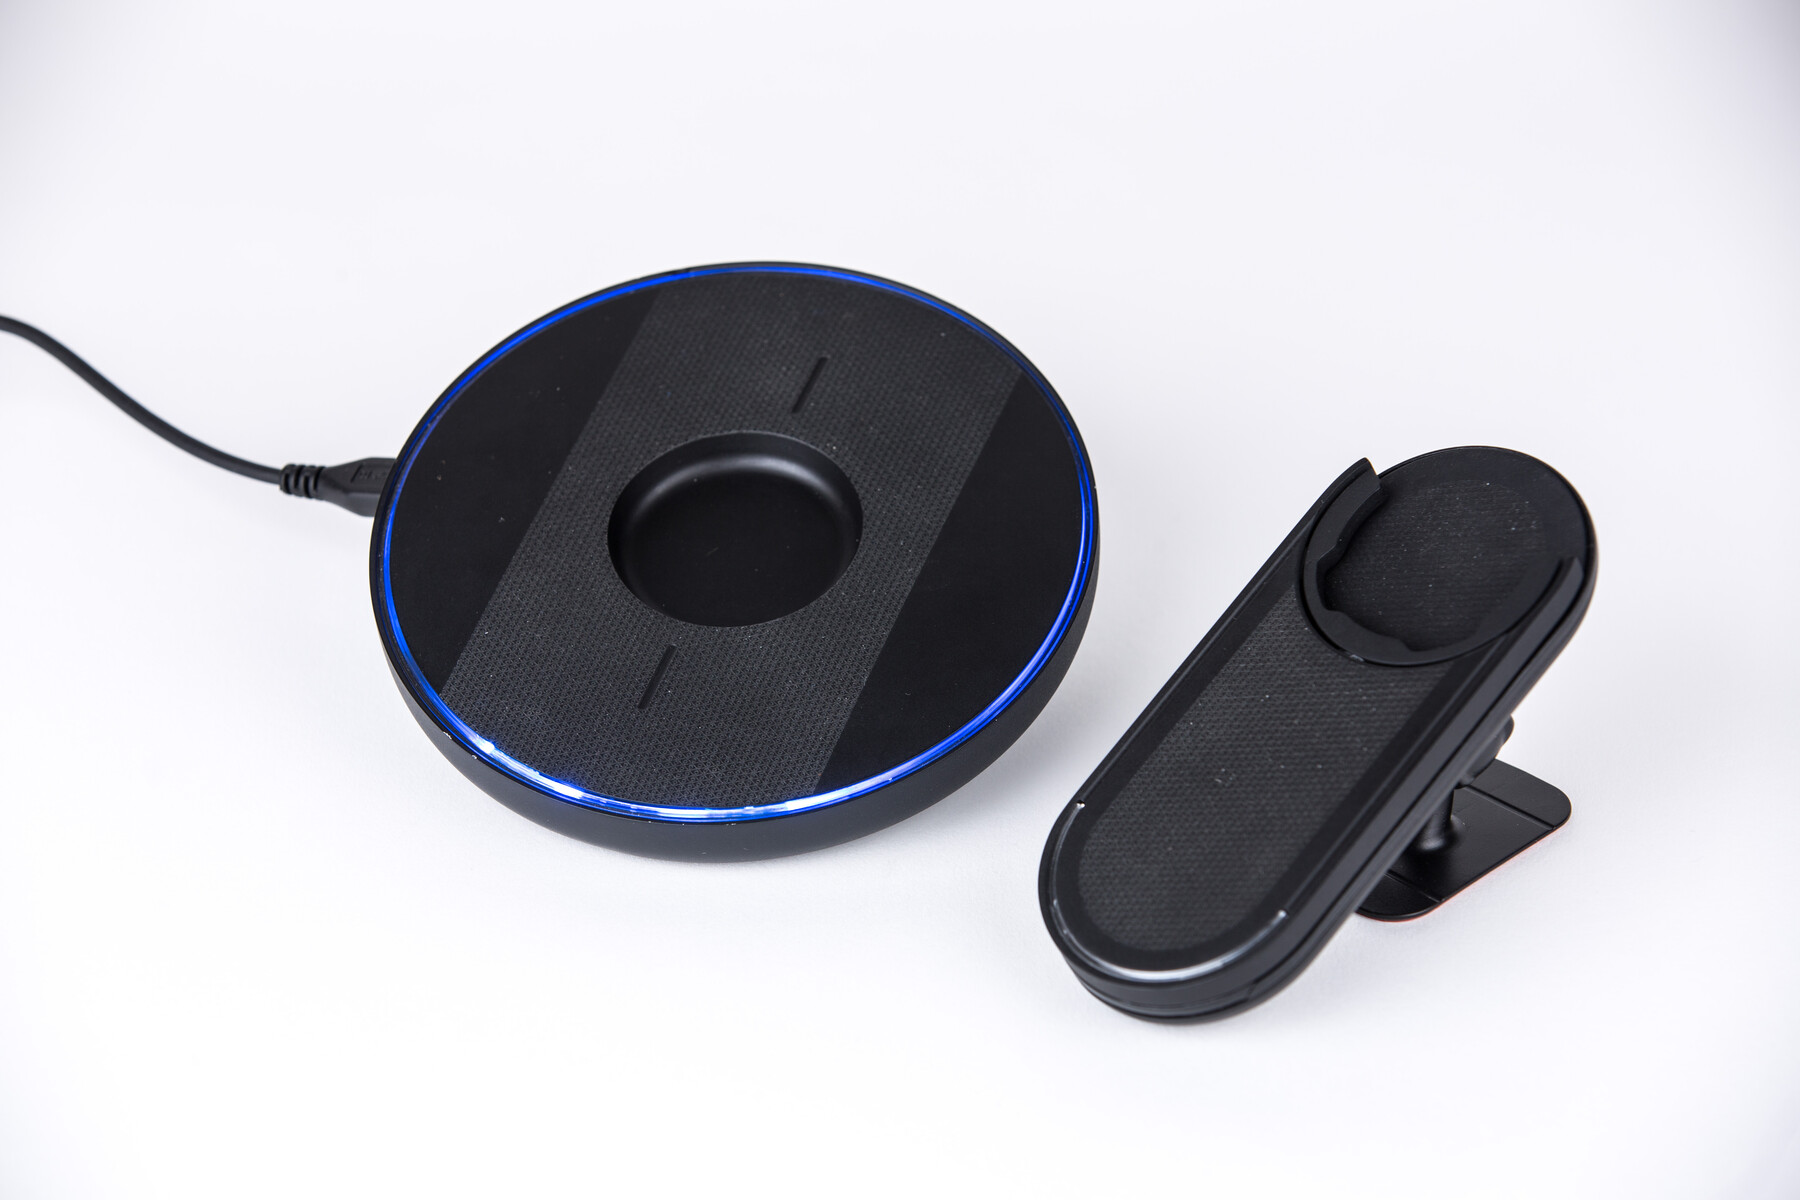 Gripdockit Wireless Charger Lets You Charge Your Smartphone With Popsockets And Grips Still Attached Notebookcheck Net News